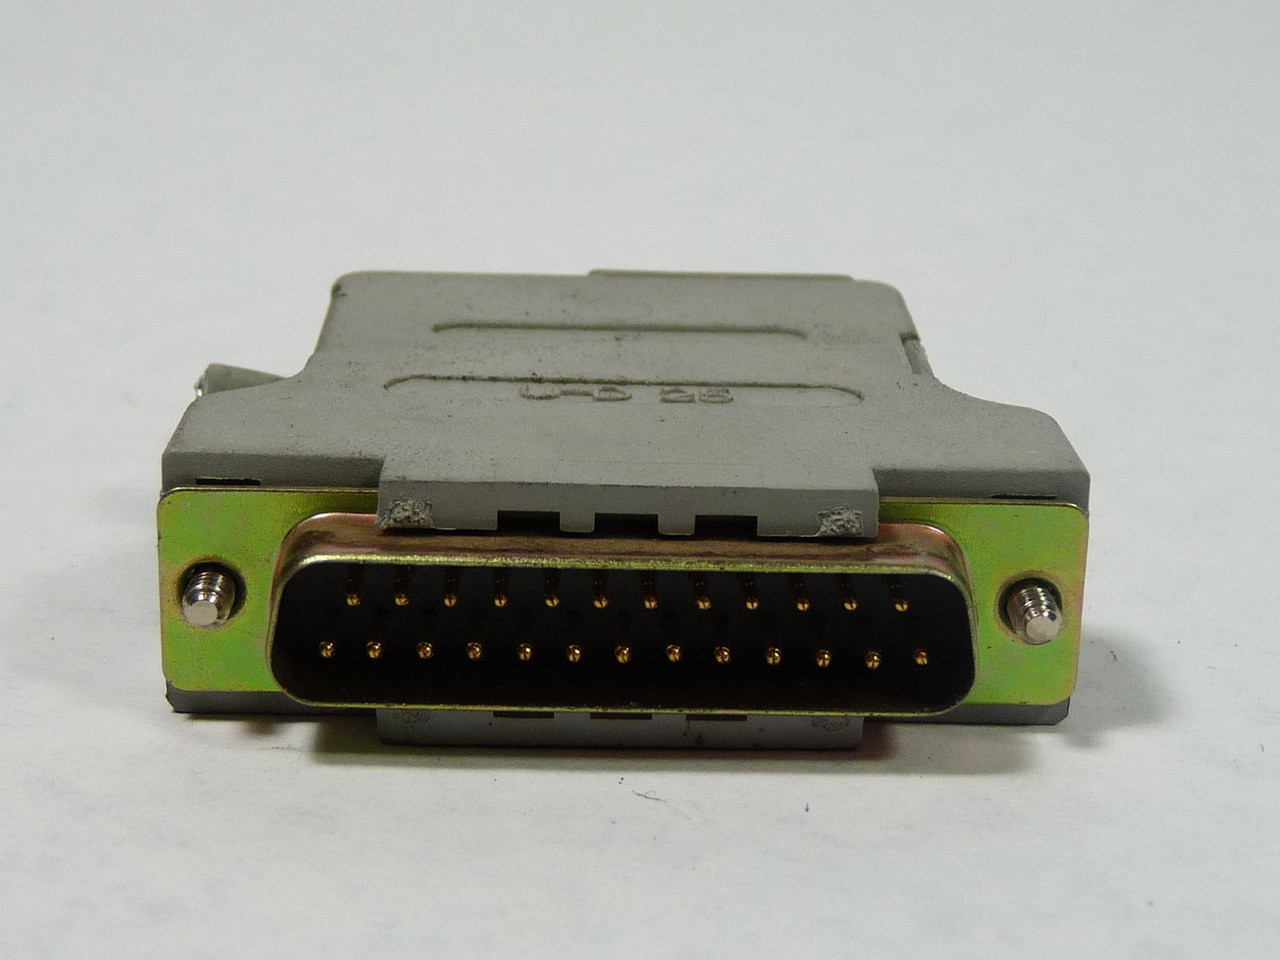 Generic U-D25 Male Connector 25-Pin USED